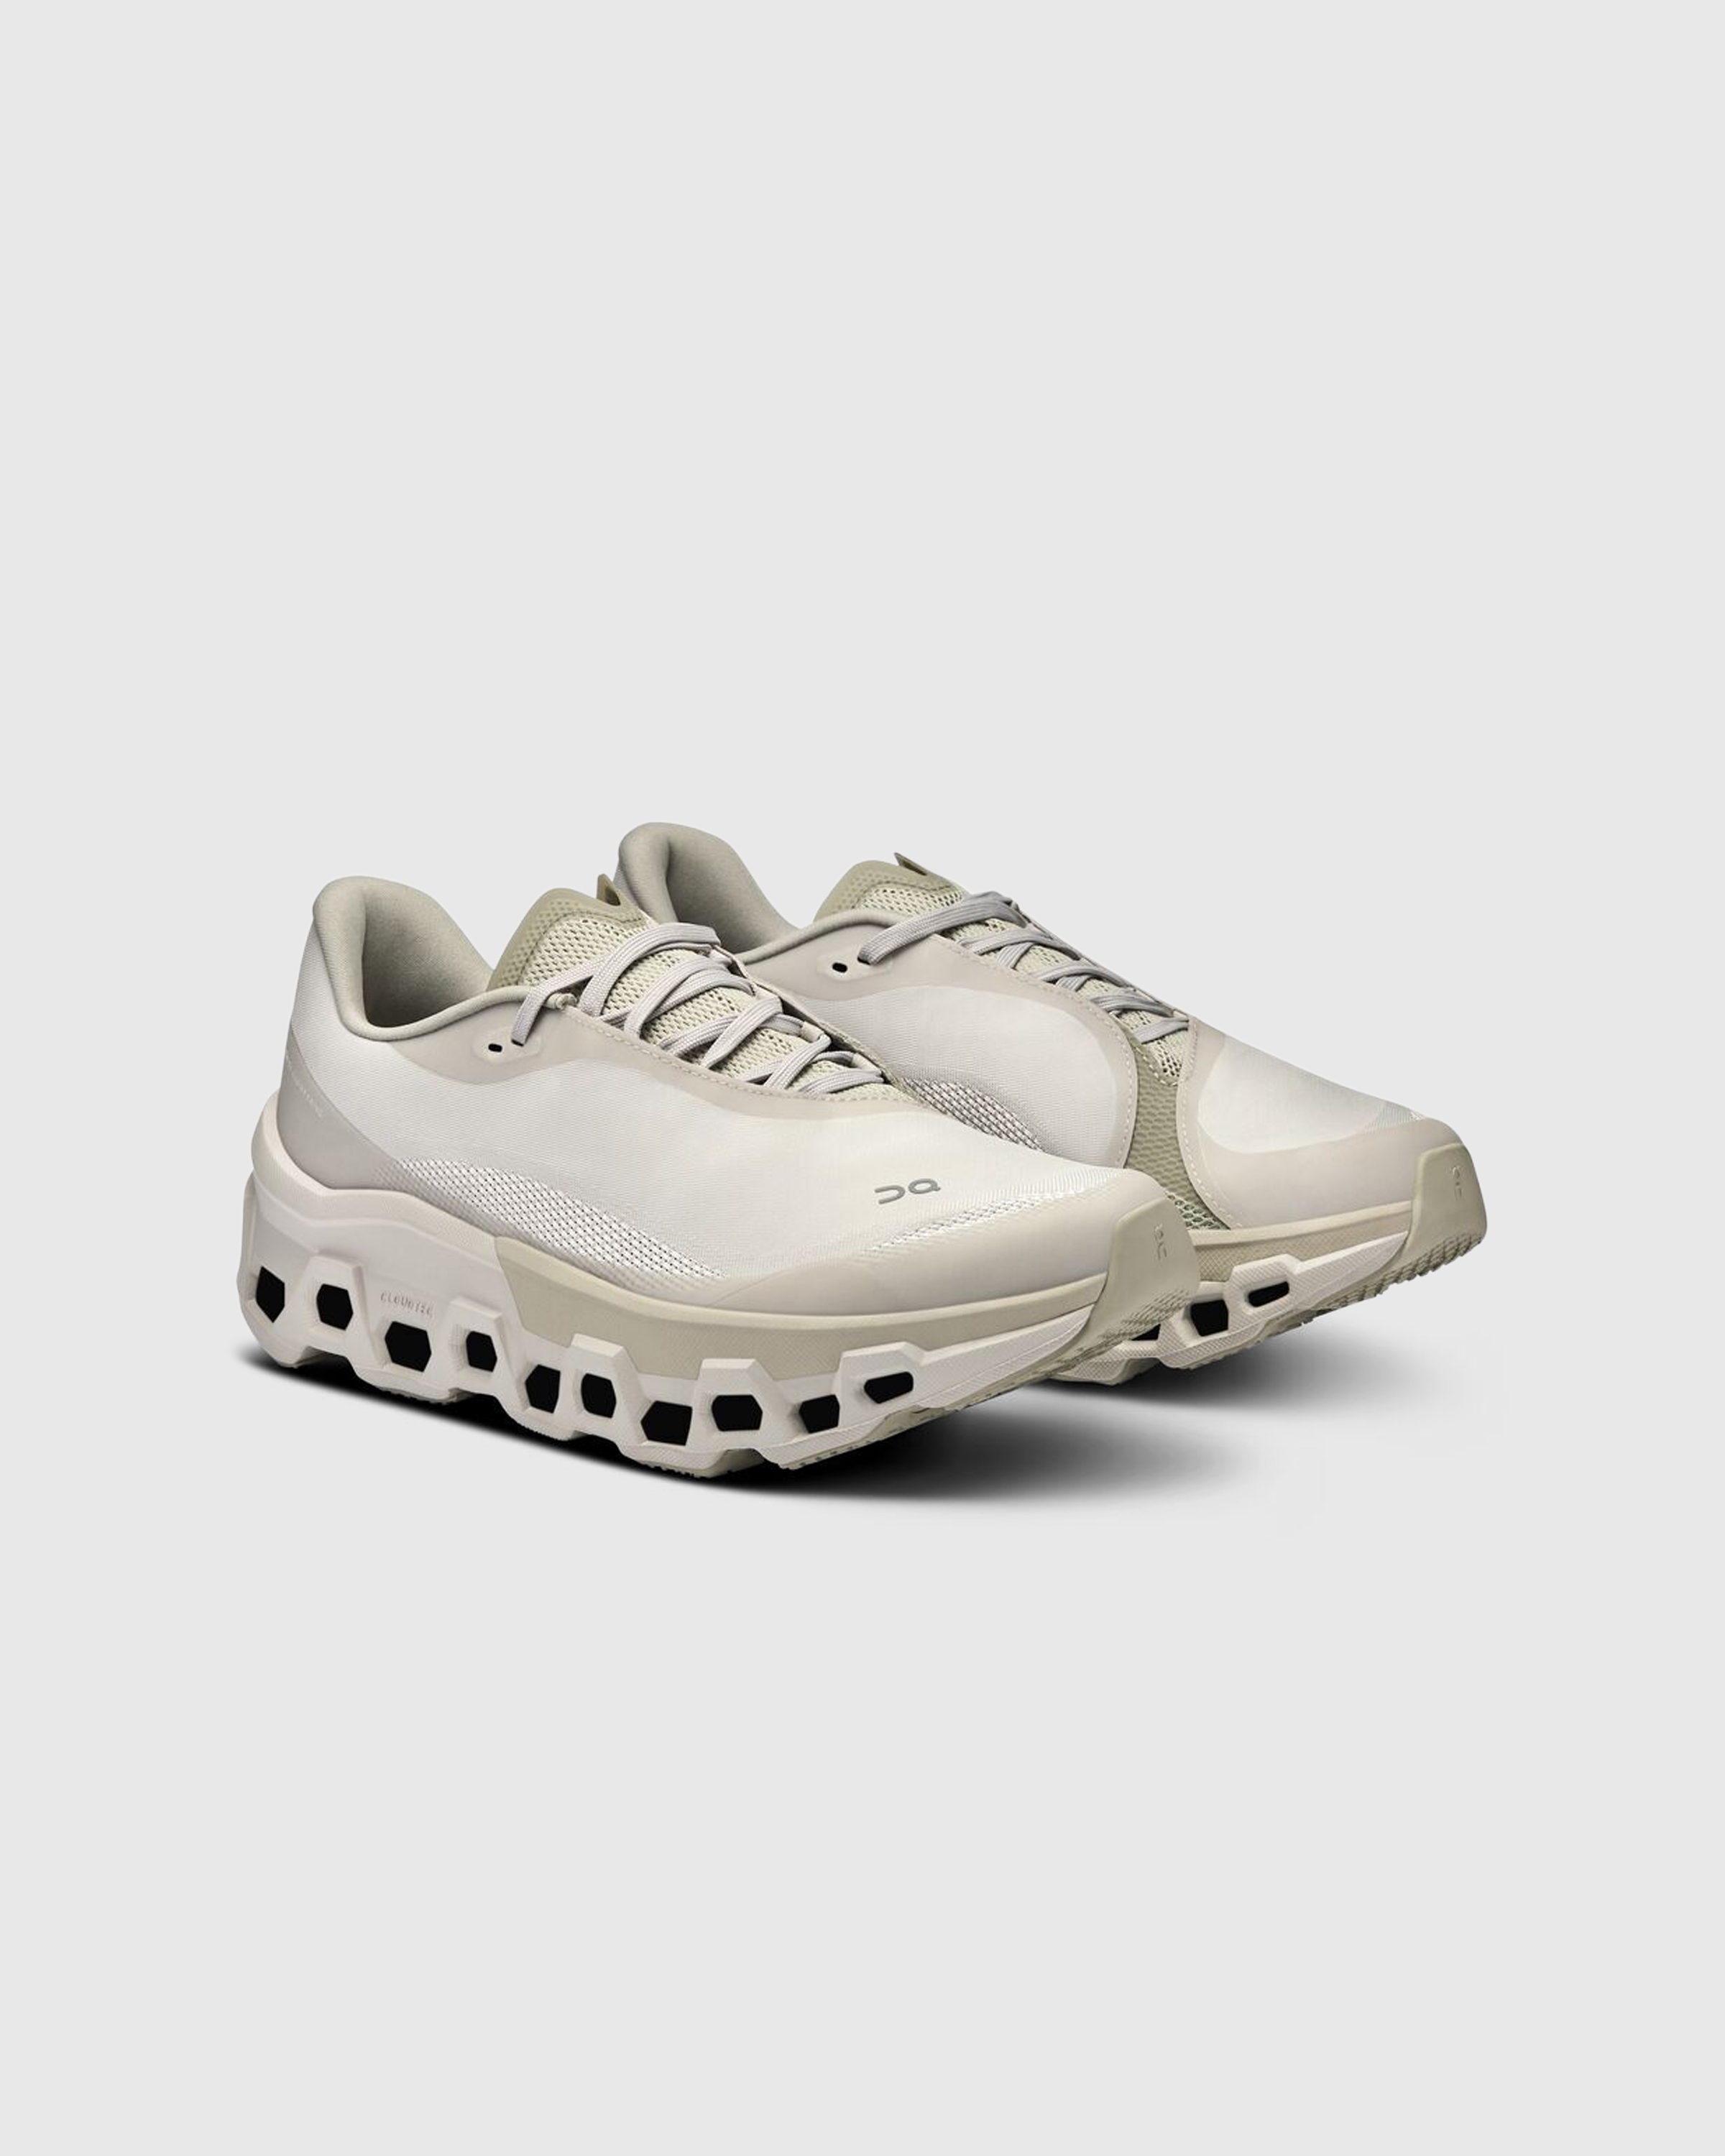 On x Post Archive Faction (PAF) – Cloudmonster 2 PAF Moondust/Chalk - Sneakers - Grey - Image 3